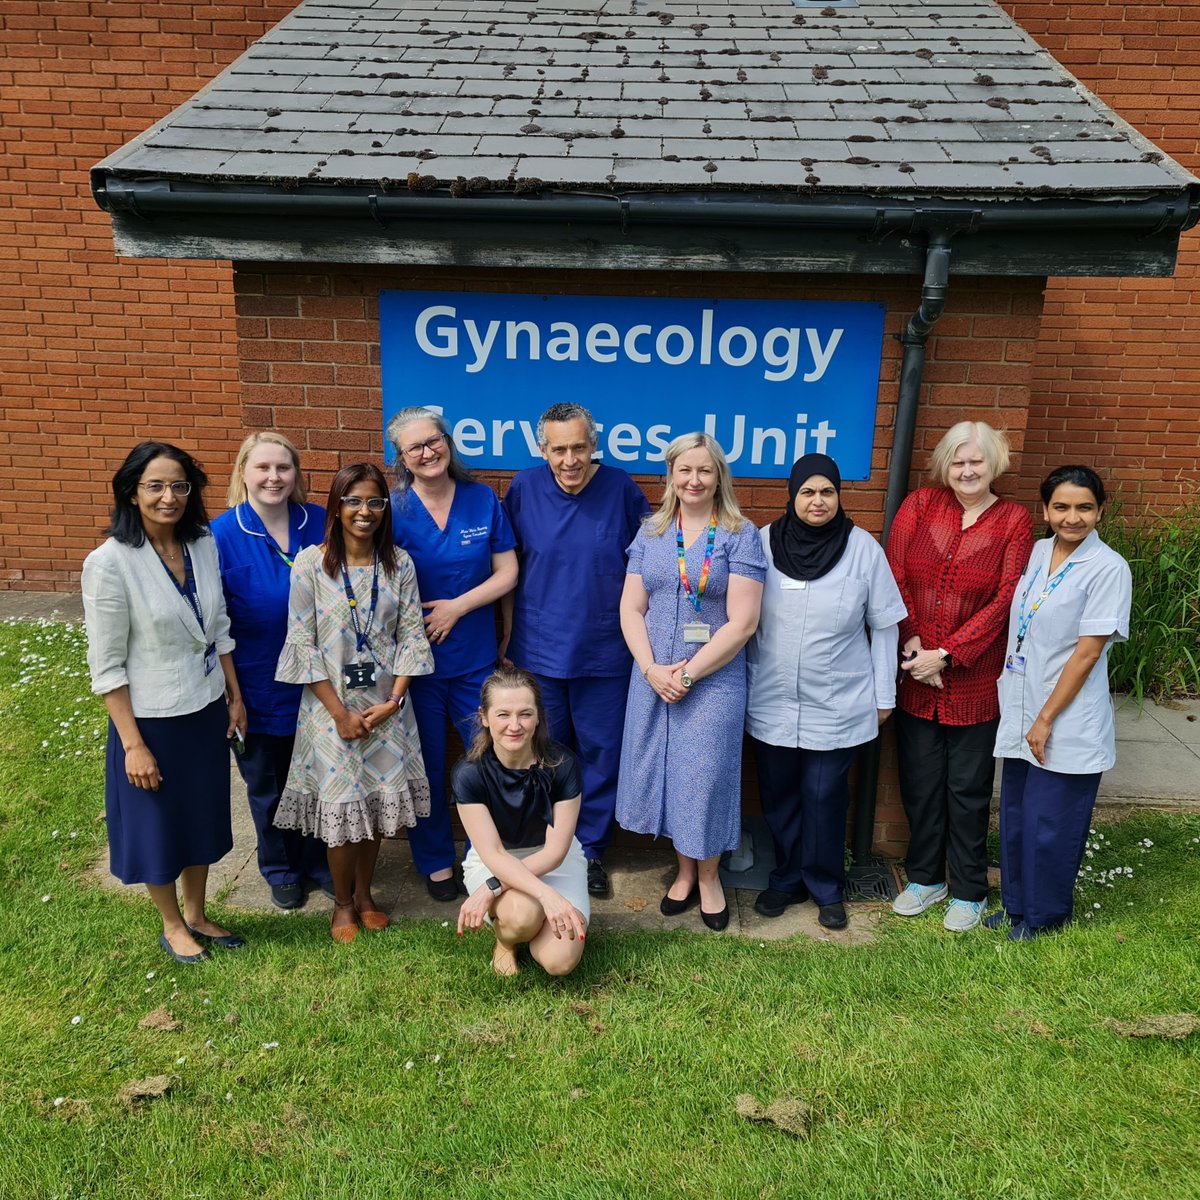 Around 1,000 patients have been seen at our weekend Gynaecology ‘mega-clinics’, with around 150 patients attending each clinic. Service Manager, Natalie Johnson, said: “From consultants to administrators, everyone in our team has been committed to making these clinics happen.”